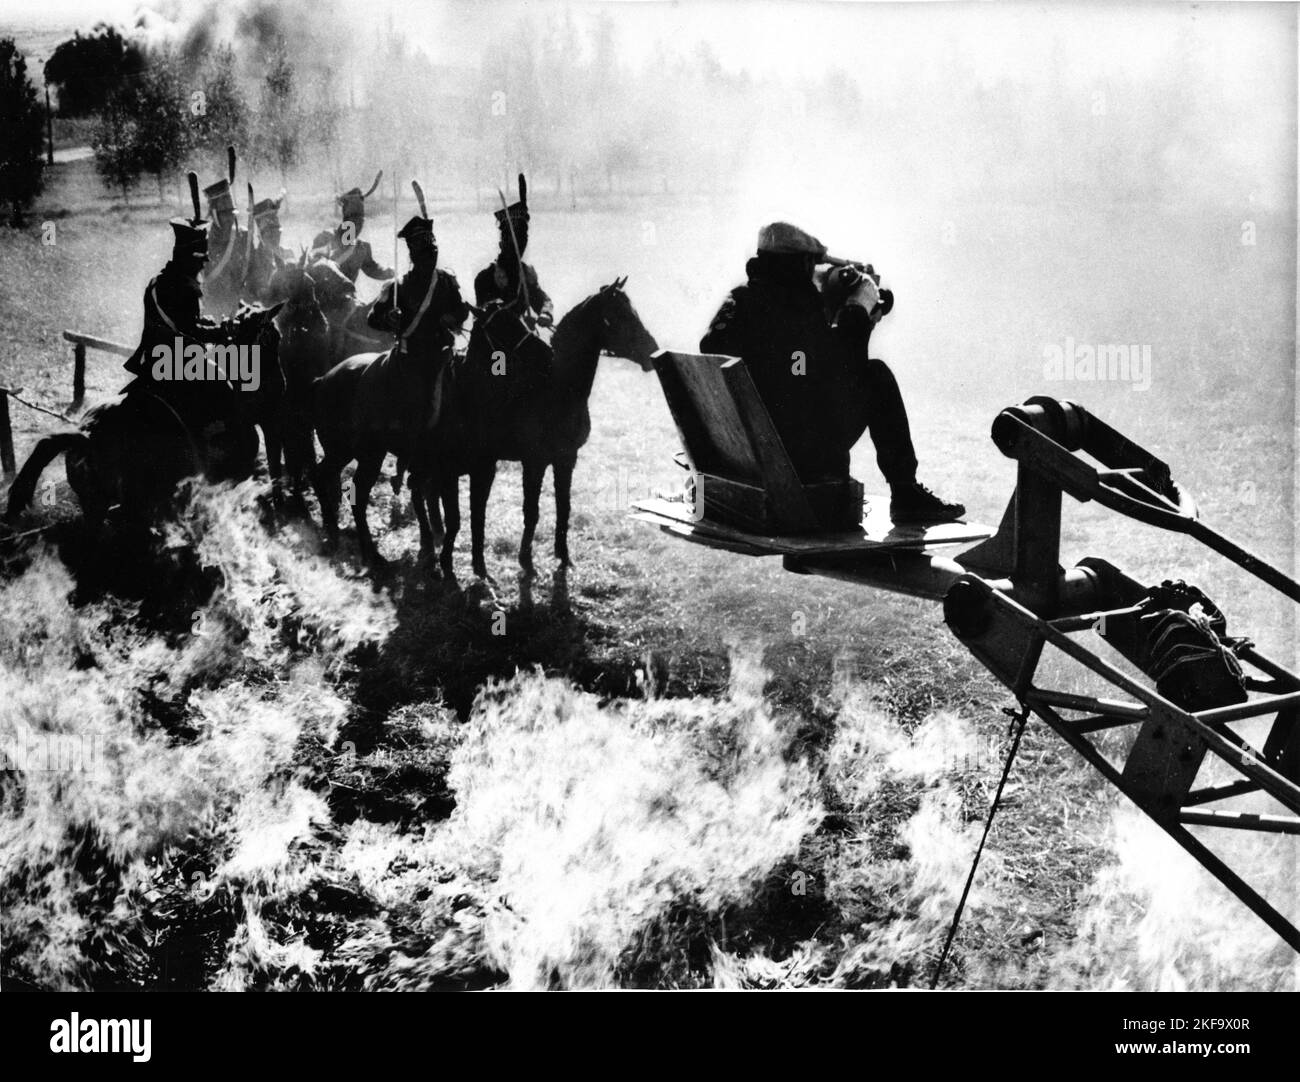 On set location candid in 1963 with Camera Crane during filming of Battle Scene for WAR AND PEACE / VOYNA I MIR 1965 director SERGEY BONDARCHUK novel Lev Tolstoy Mosfilm Stock Photo